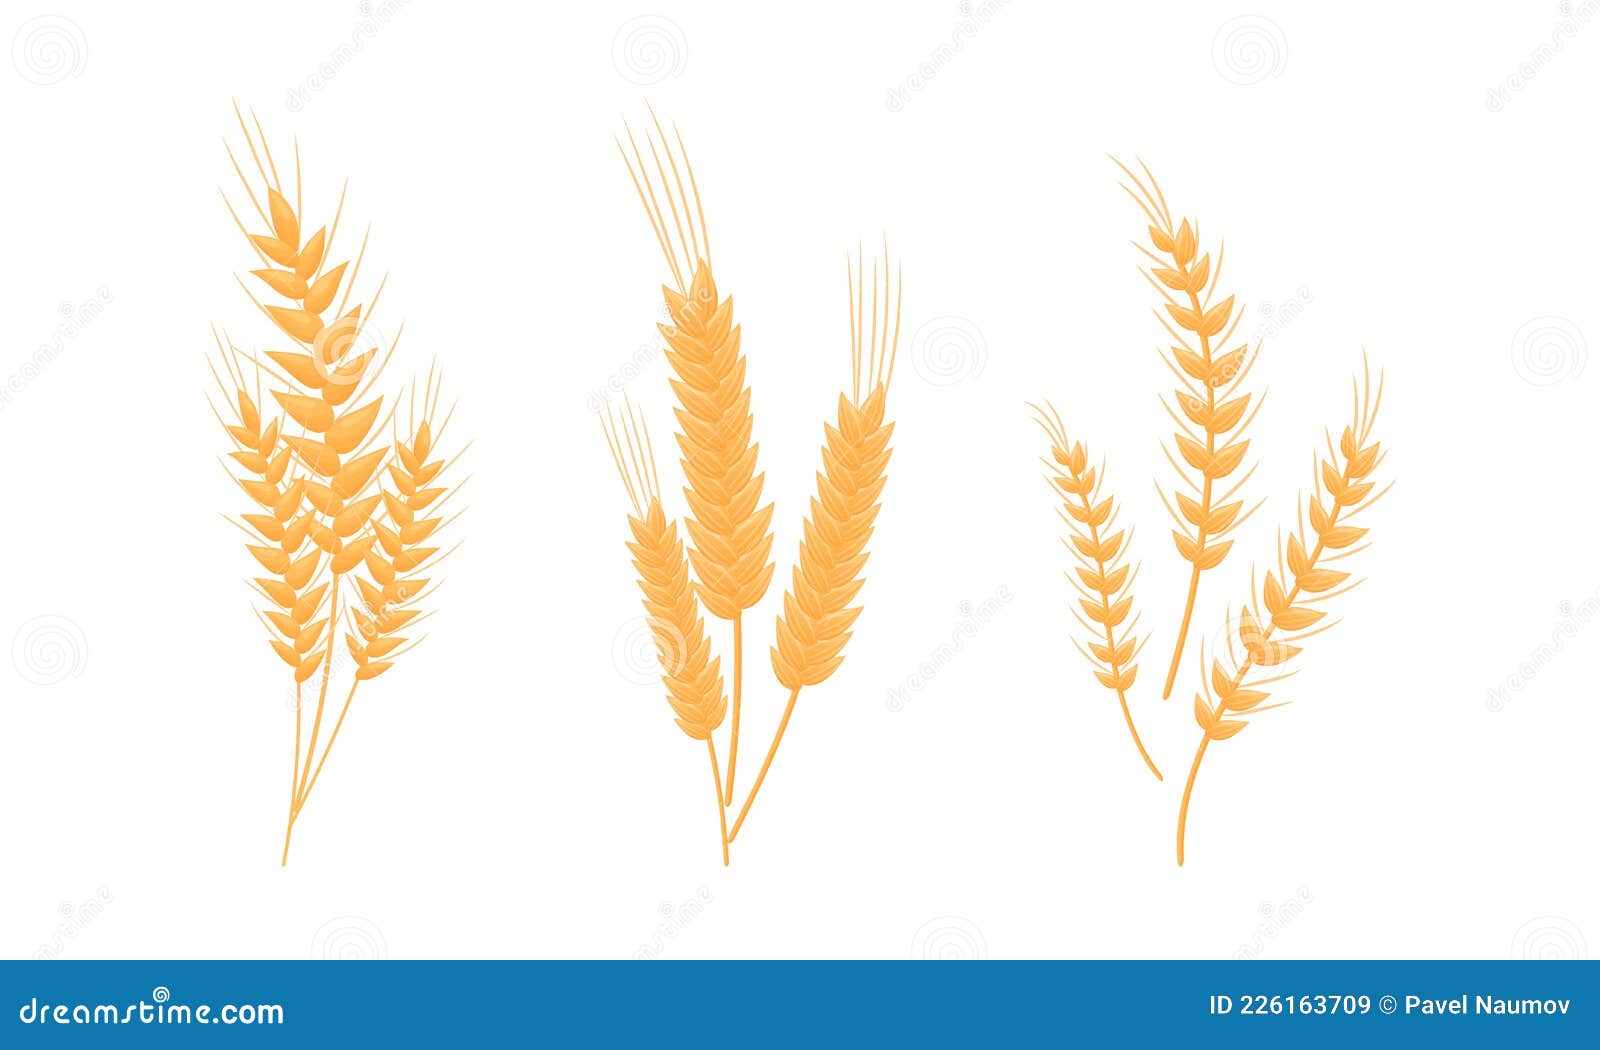 Ear of Wheat or Barley As Grain Crop or Cereal Specie and Cultivated ...